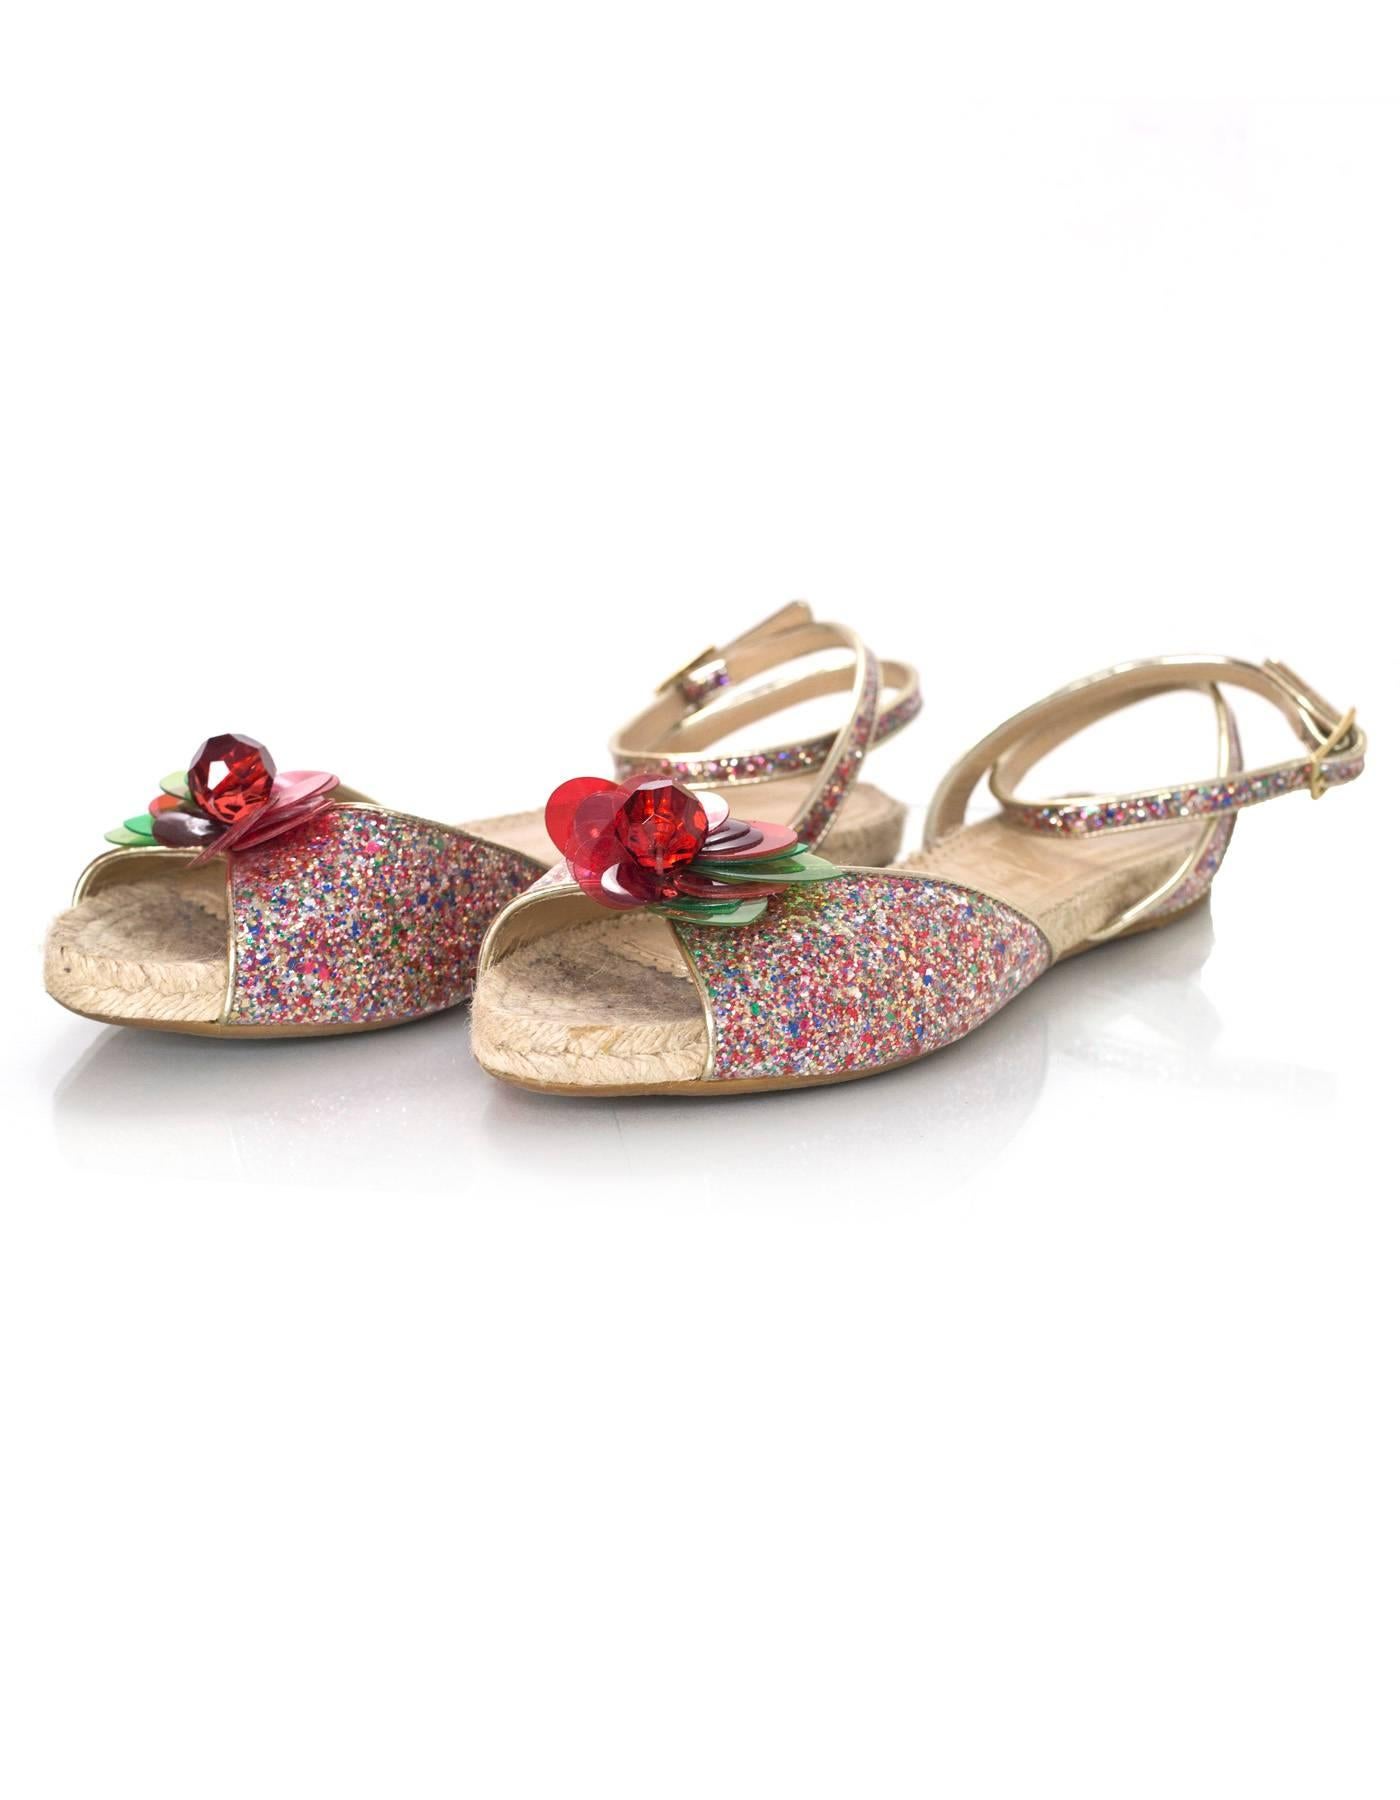 Charlotte Olympia Rainbow Glitter Espadrilles Sz 38.5

Made In: Italy
Color: Multi
Materials: Glitter, plastic, jute rope
Closure/Opening: Buckle closure at ankle
Sole Stamp: Made in Italy 38.5
Overall Condition: Excellent pre-owned condition with